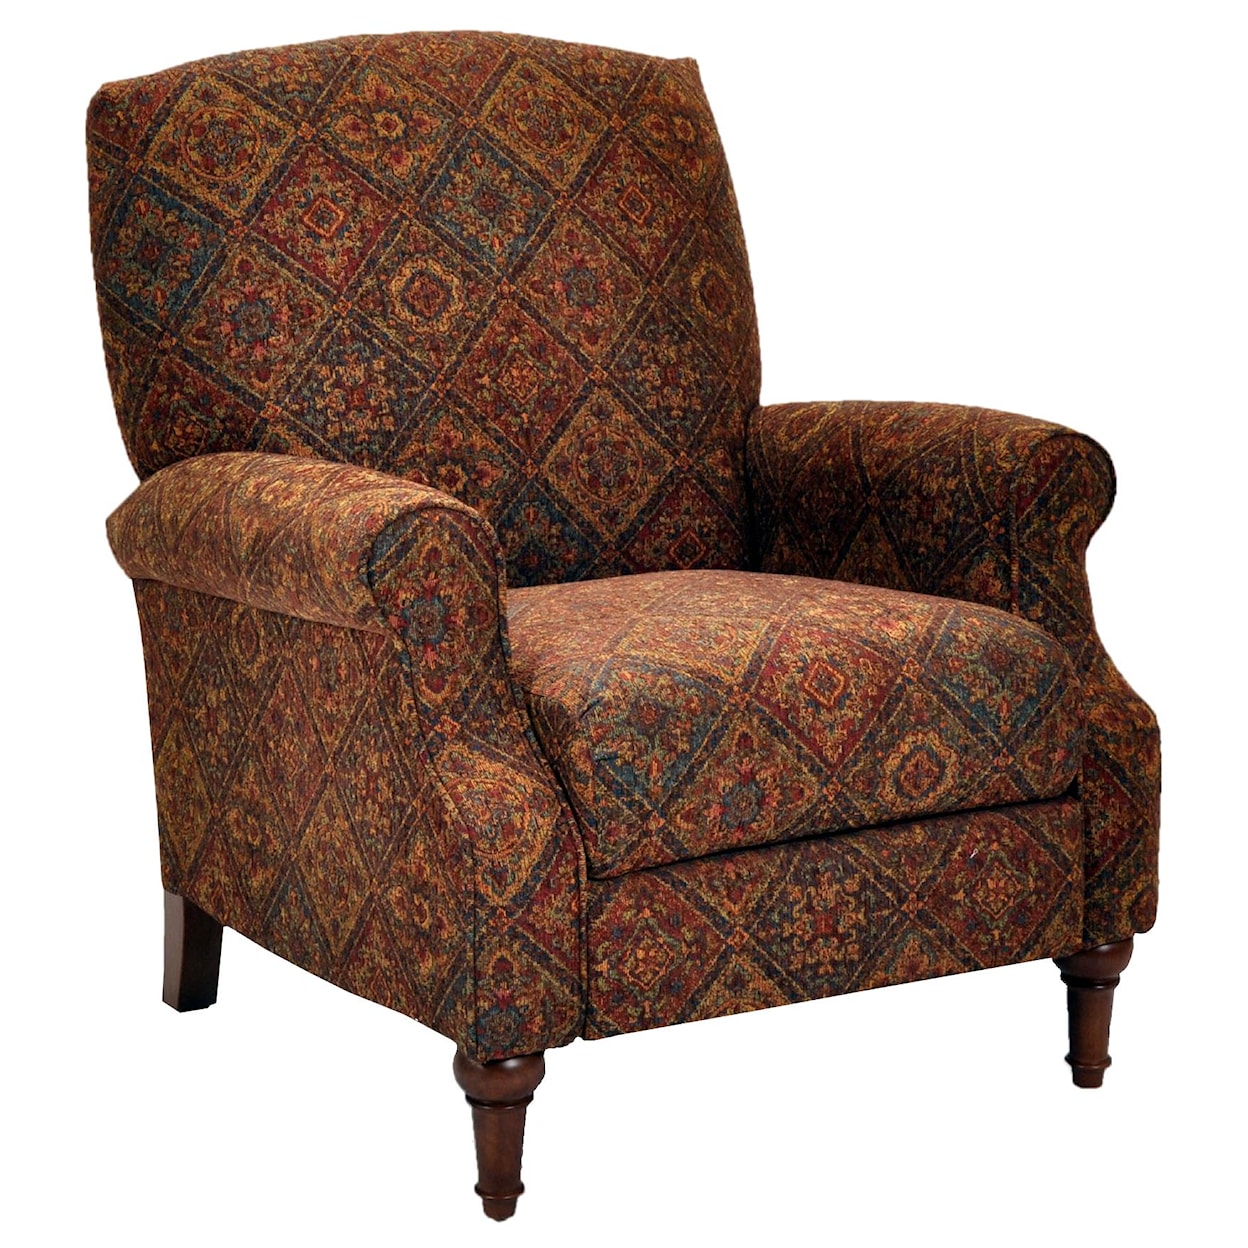 Franklin High and Low Leg Recliners  Kate Traditional Recliner